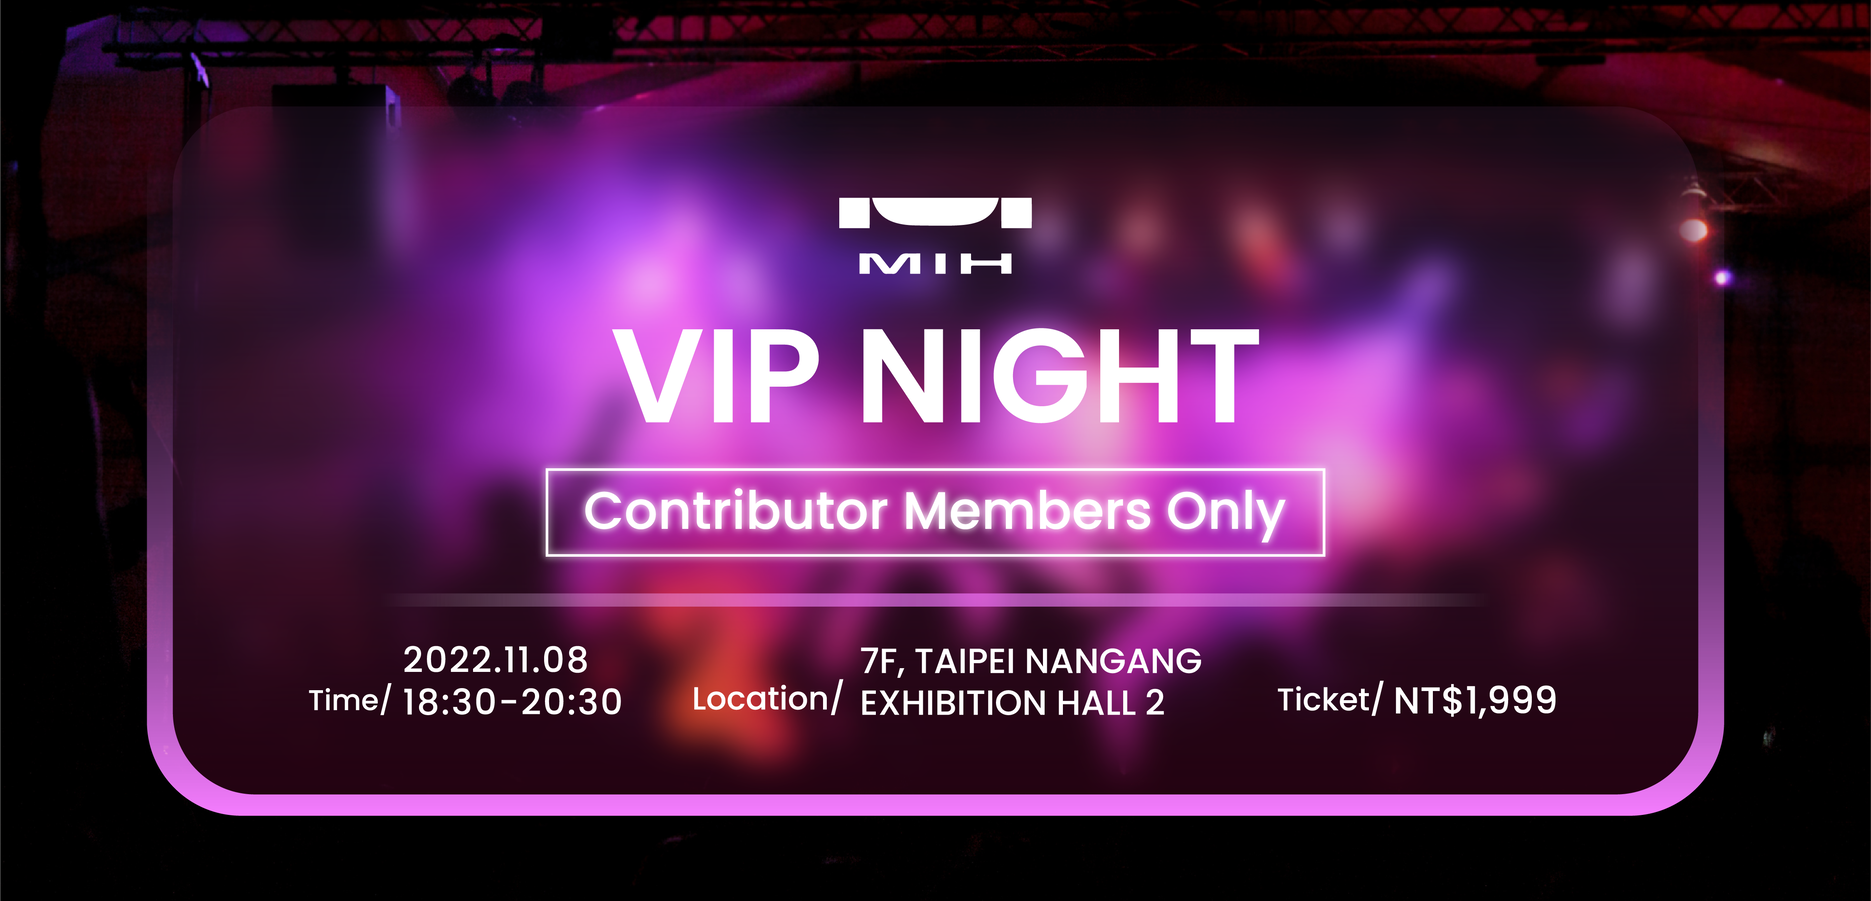 Exclusive MIH VIP NIGHT for Contributor Members